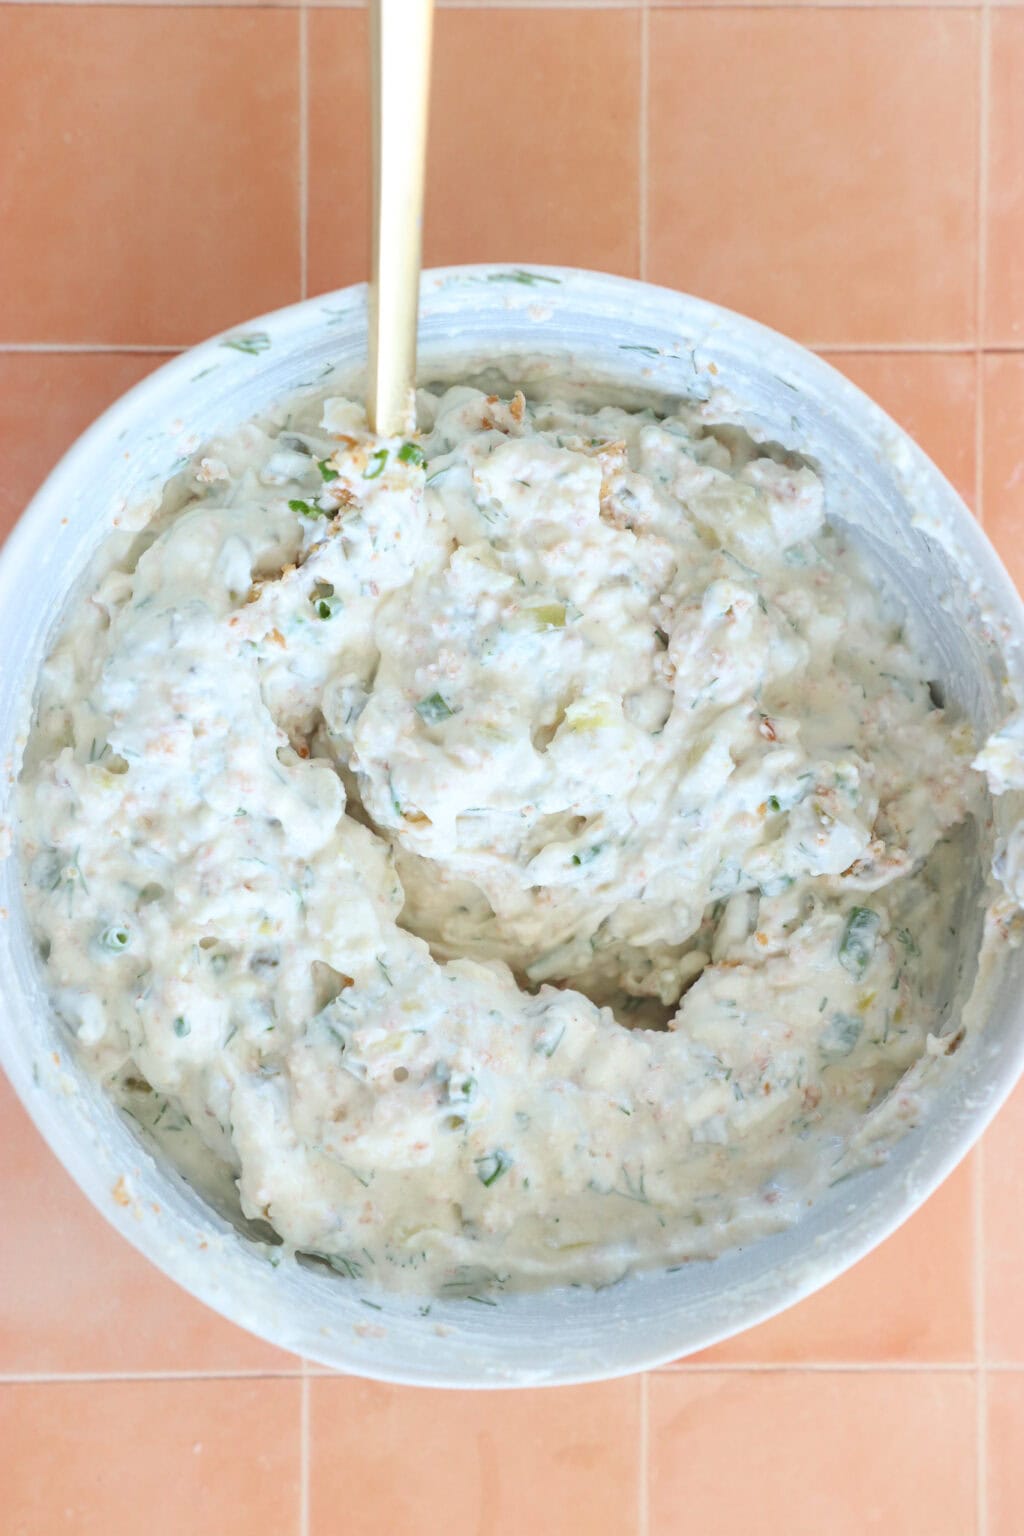 Ingredients for Seriously Good "Fried" Pickle Dip with Greek Yogurt mixed in a while bowl